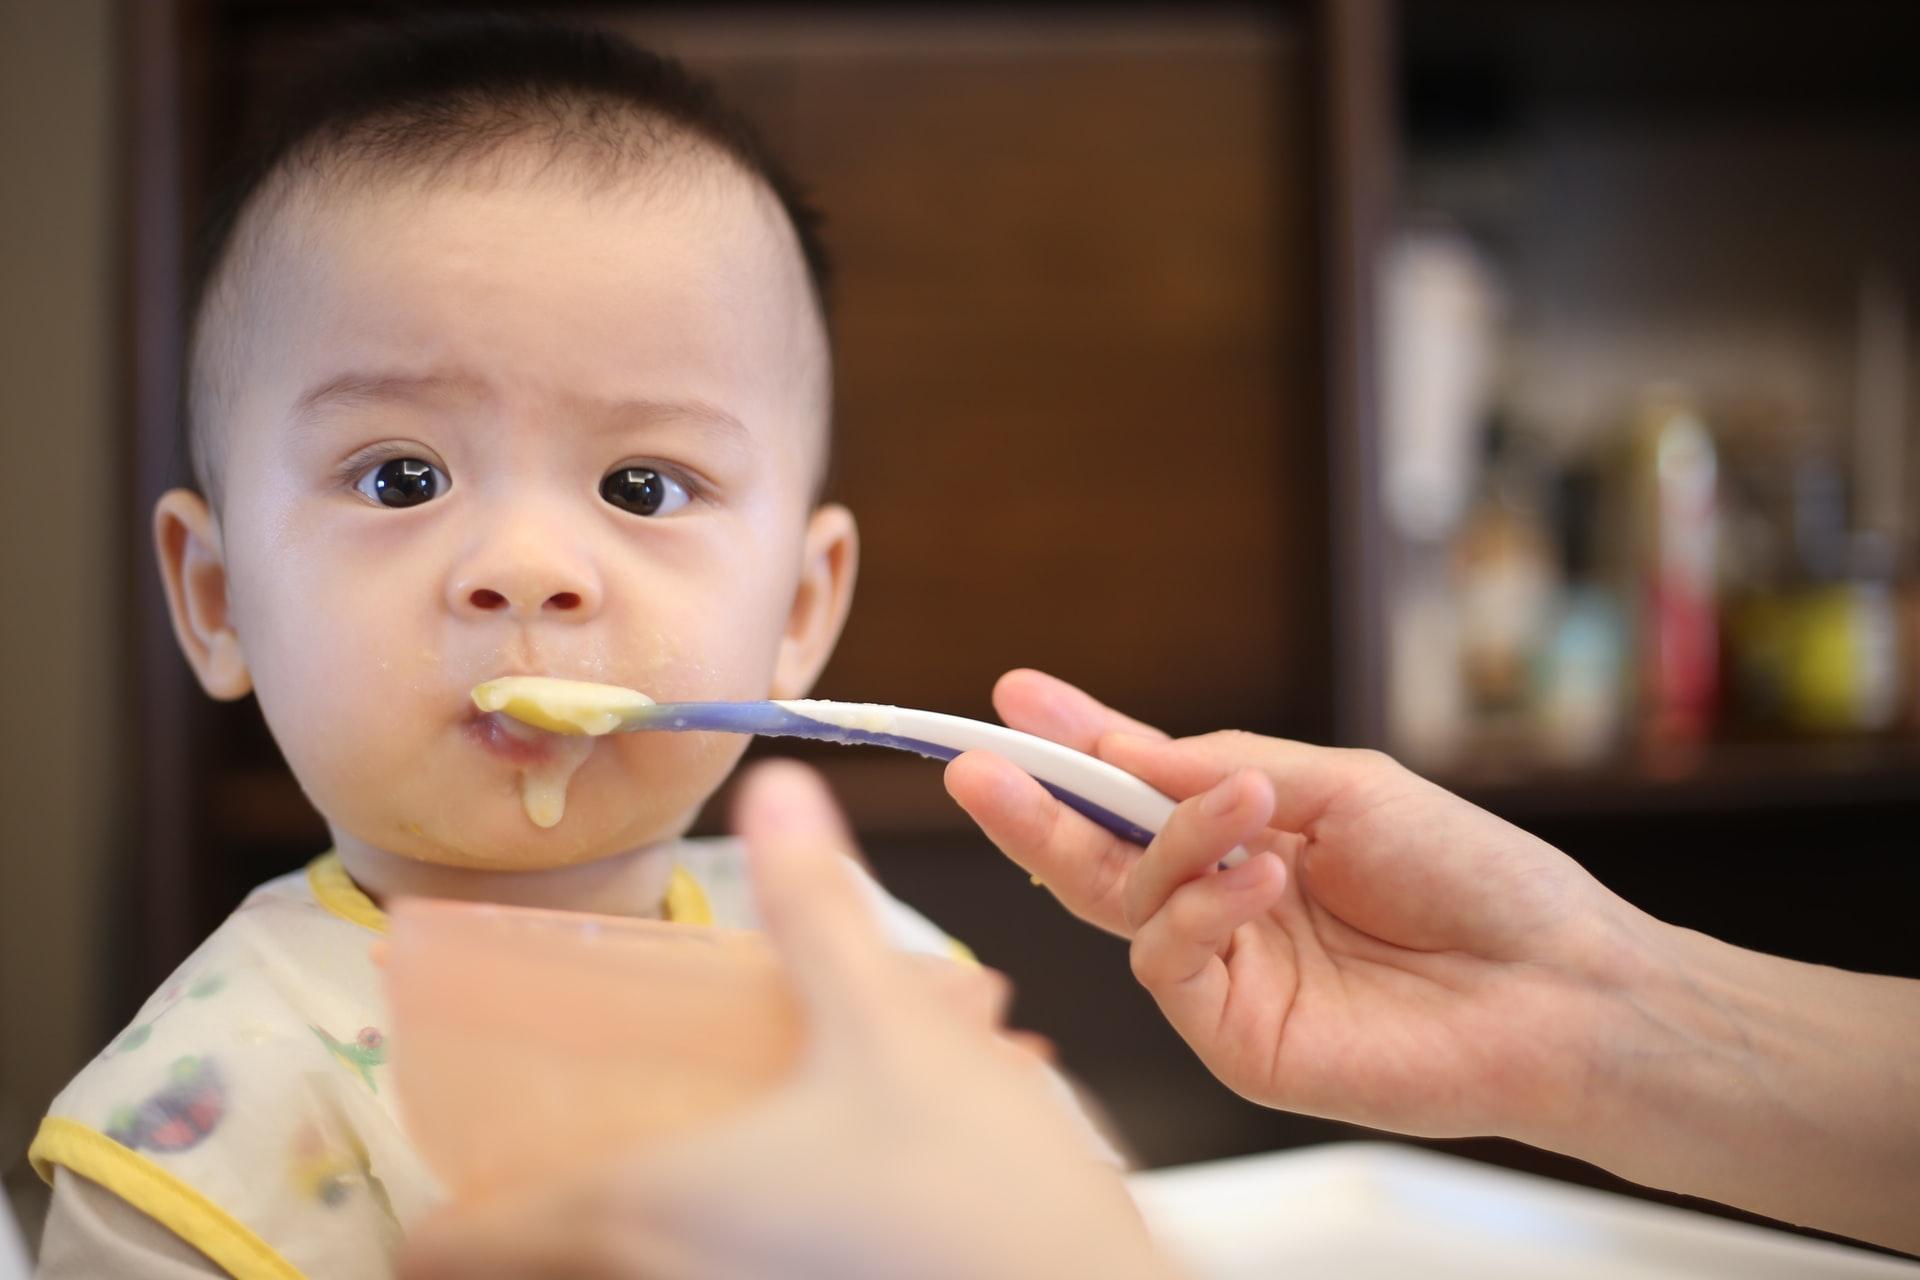 An alert baby with dark hair and Asian eyes takes a bite of cream-colored puree from a spoon held by an adult hand.